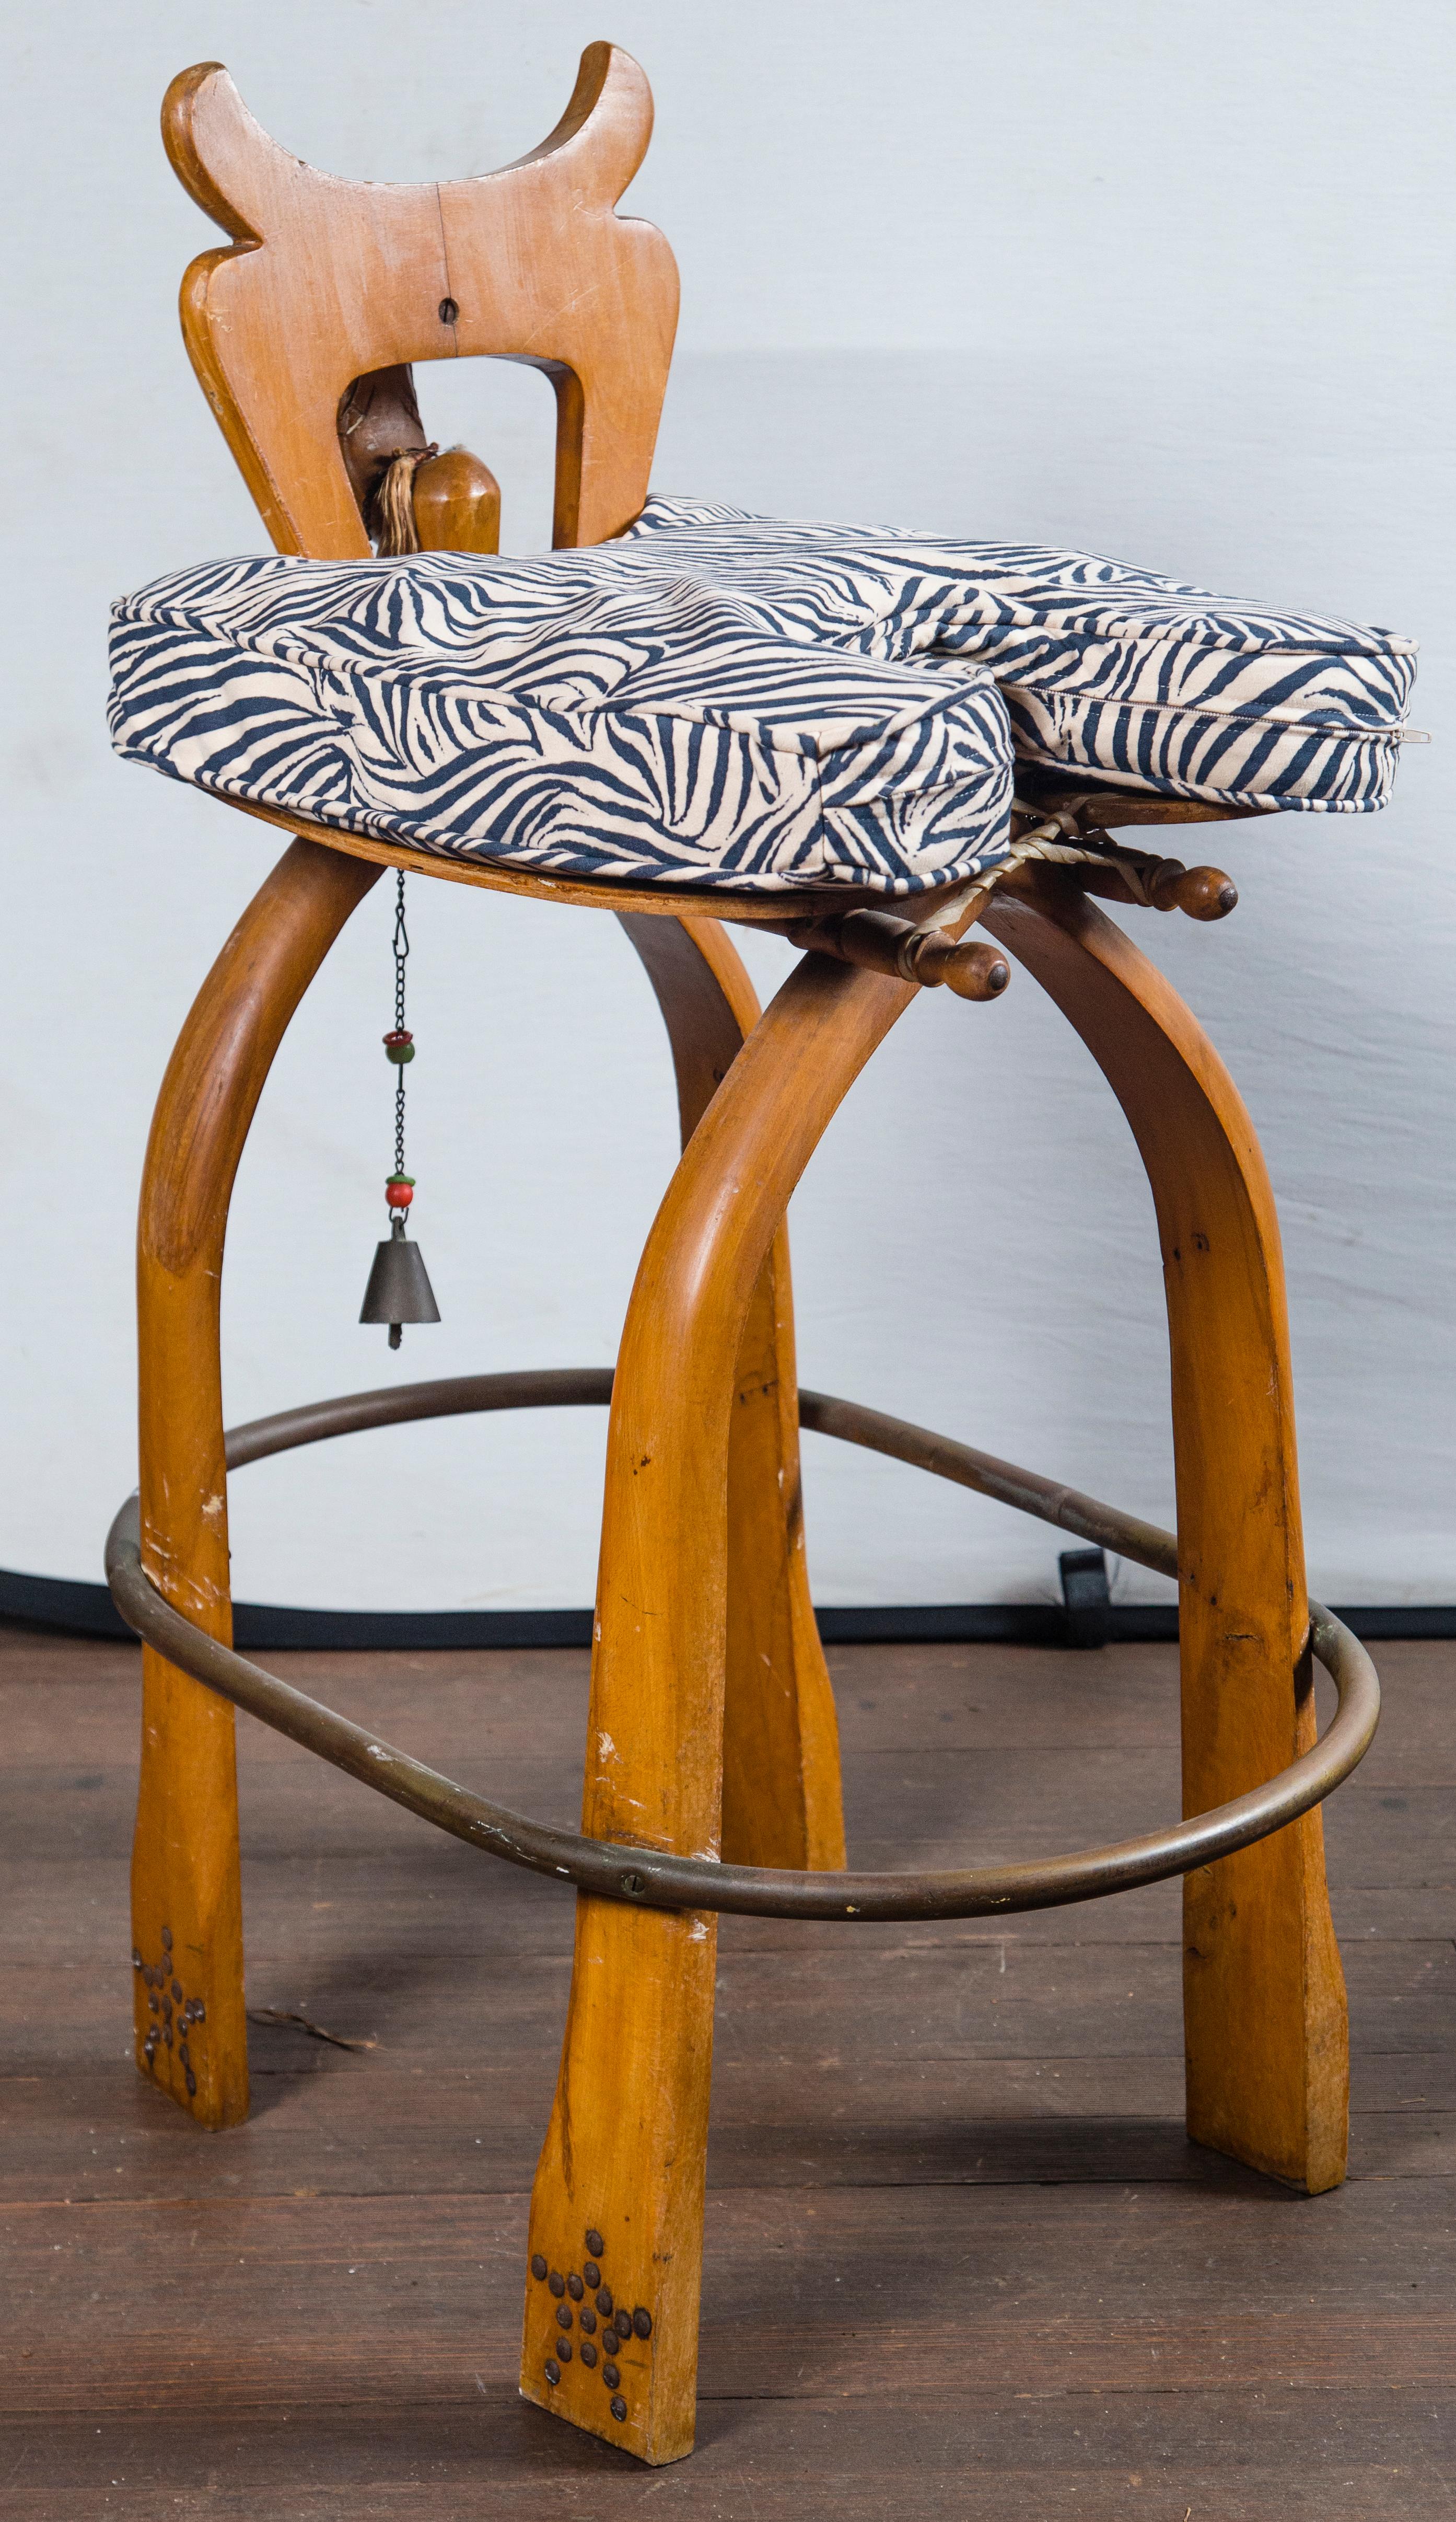 Unusual carved camel head bar stools. Seat: 15 inches wide, 16 inches deep. Stylized zebra fabric cushions.